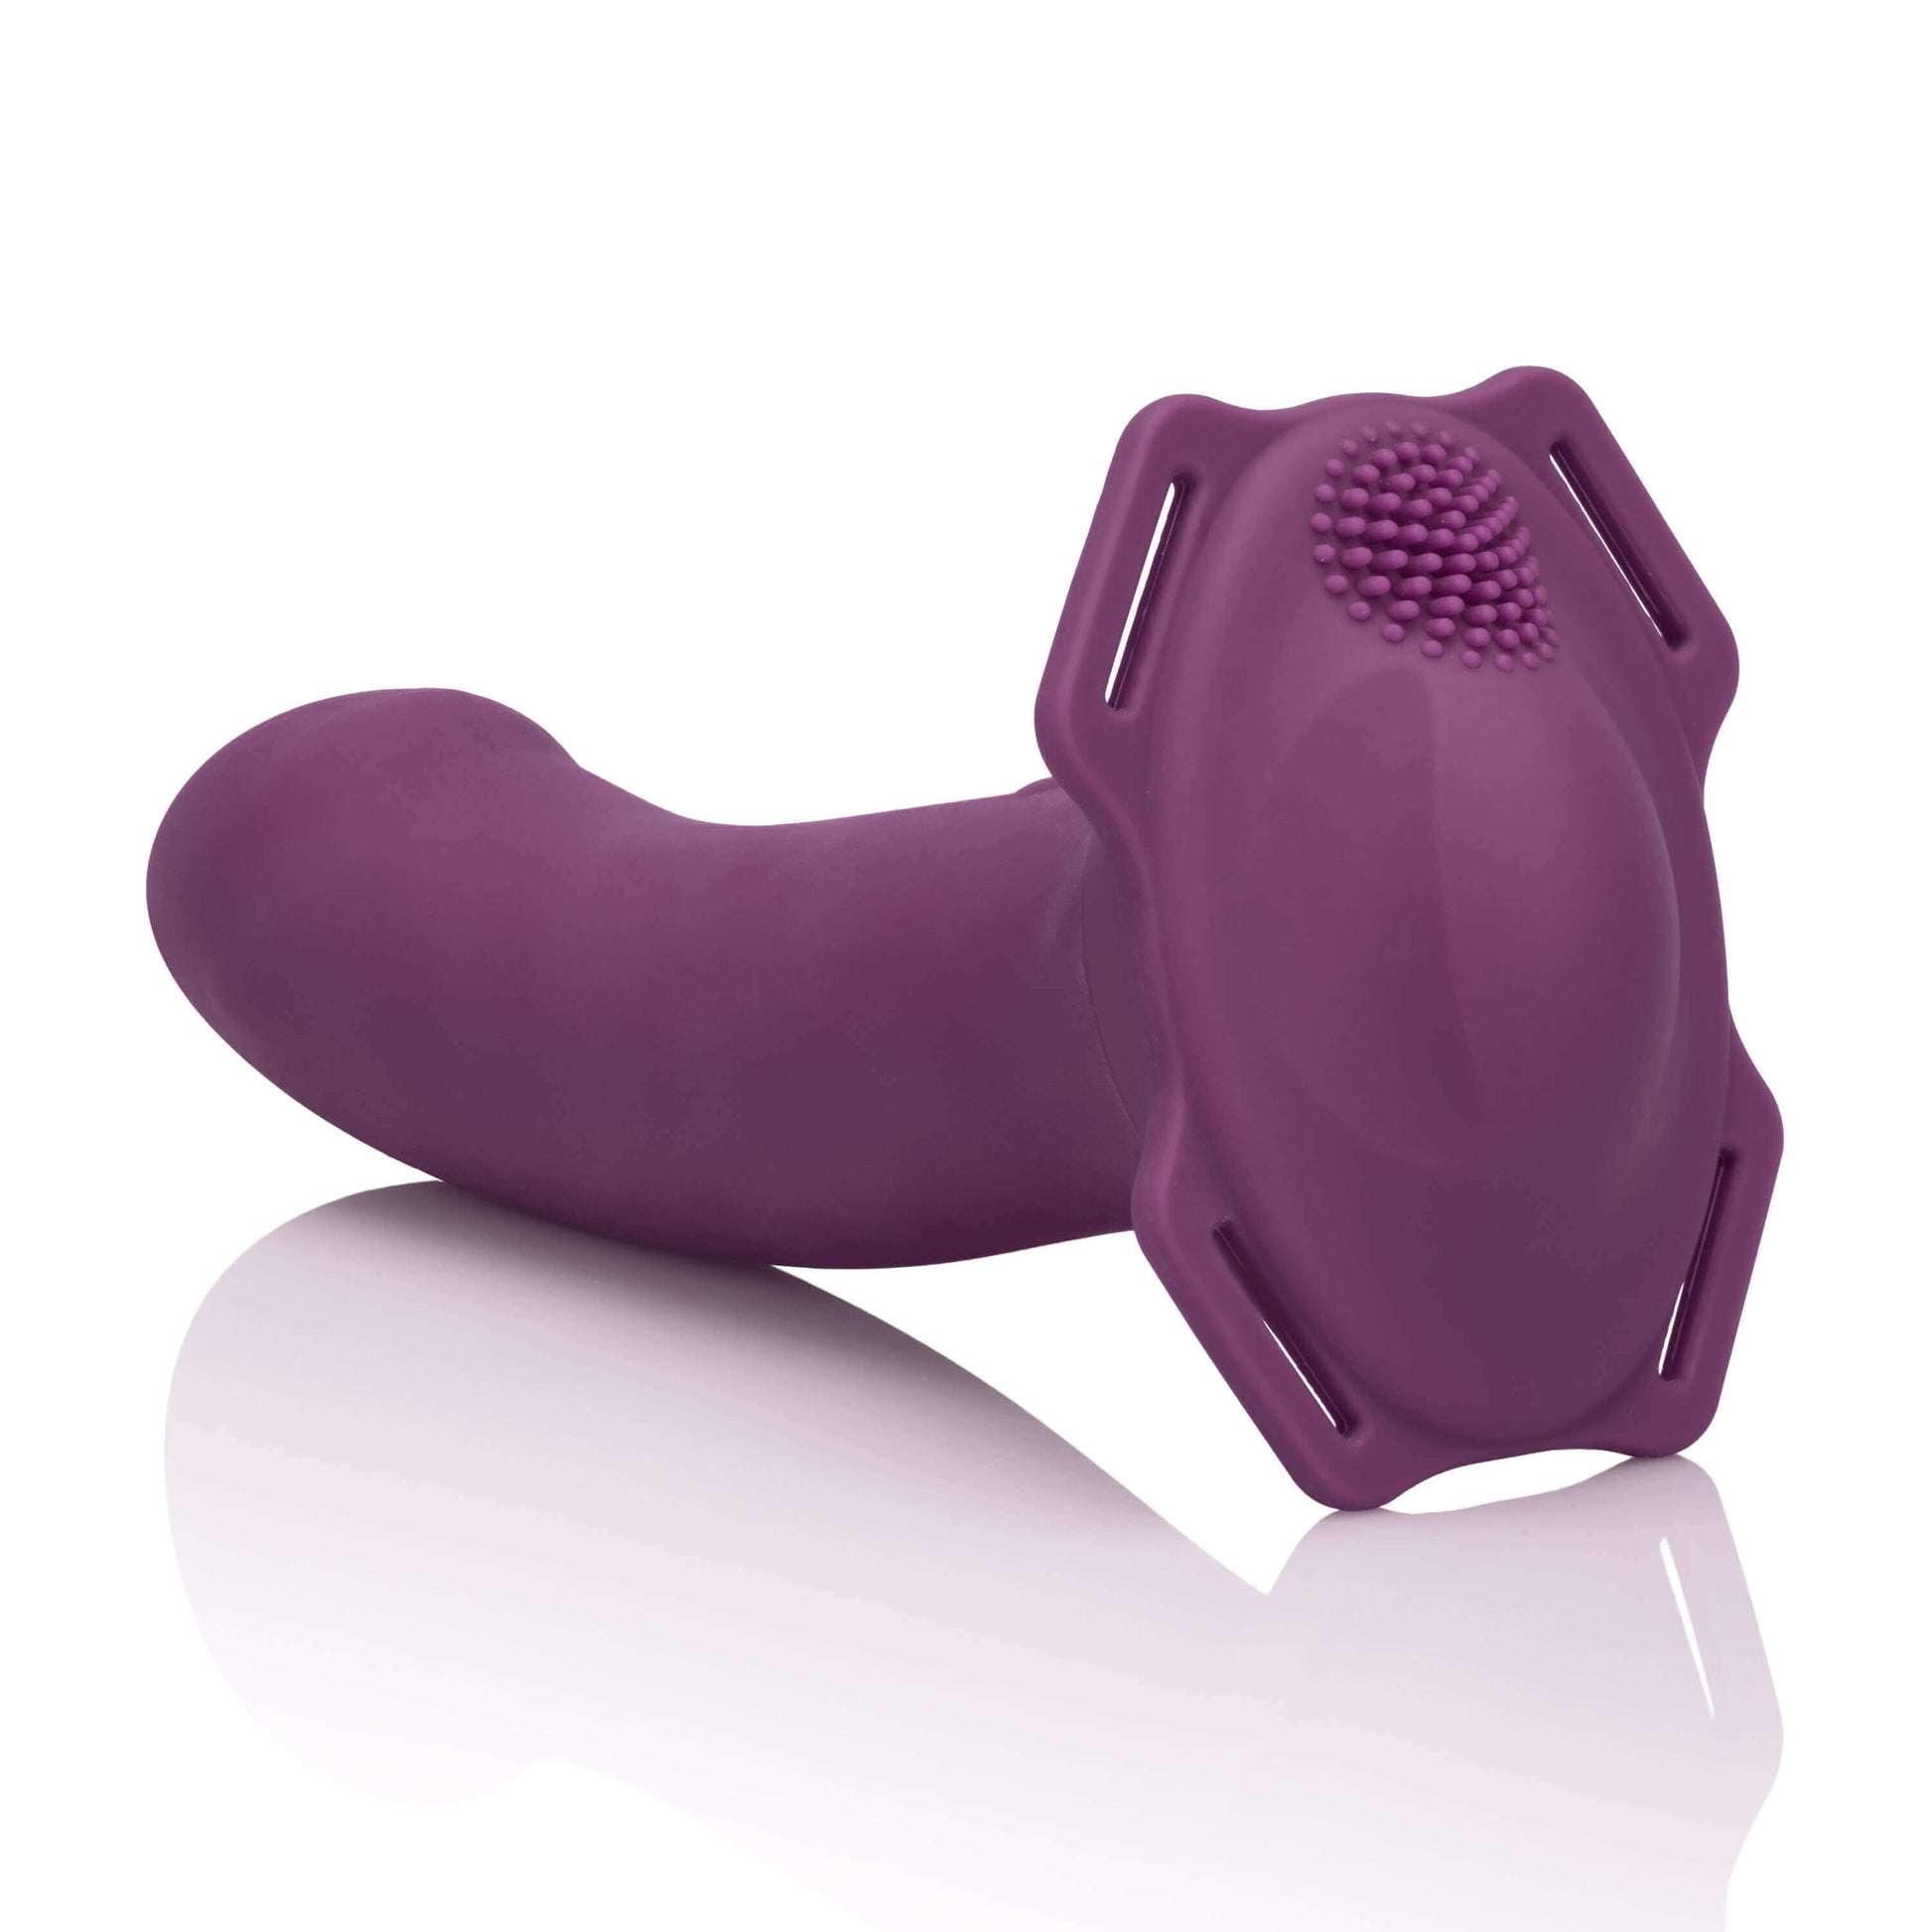 Me2 Rumble Vibrating Dildo and Strap-On - CalExotics - The Bigger O online sex toy shop USA, Canada & UK shipping available